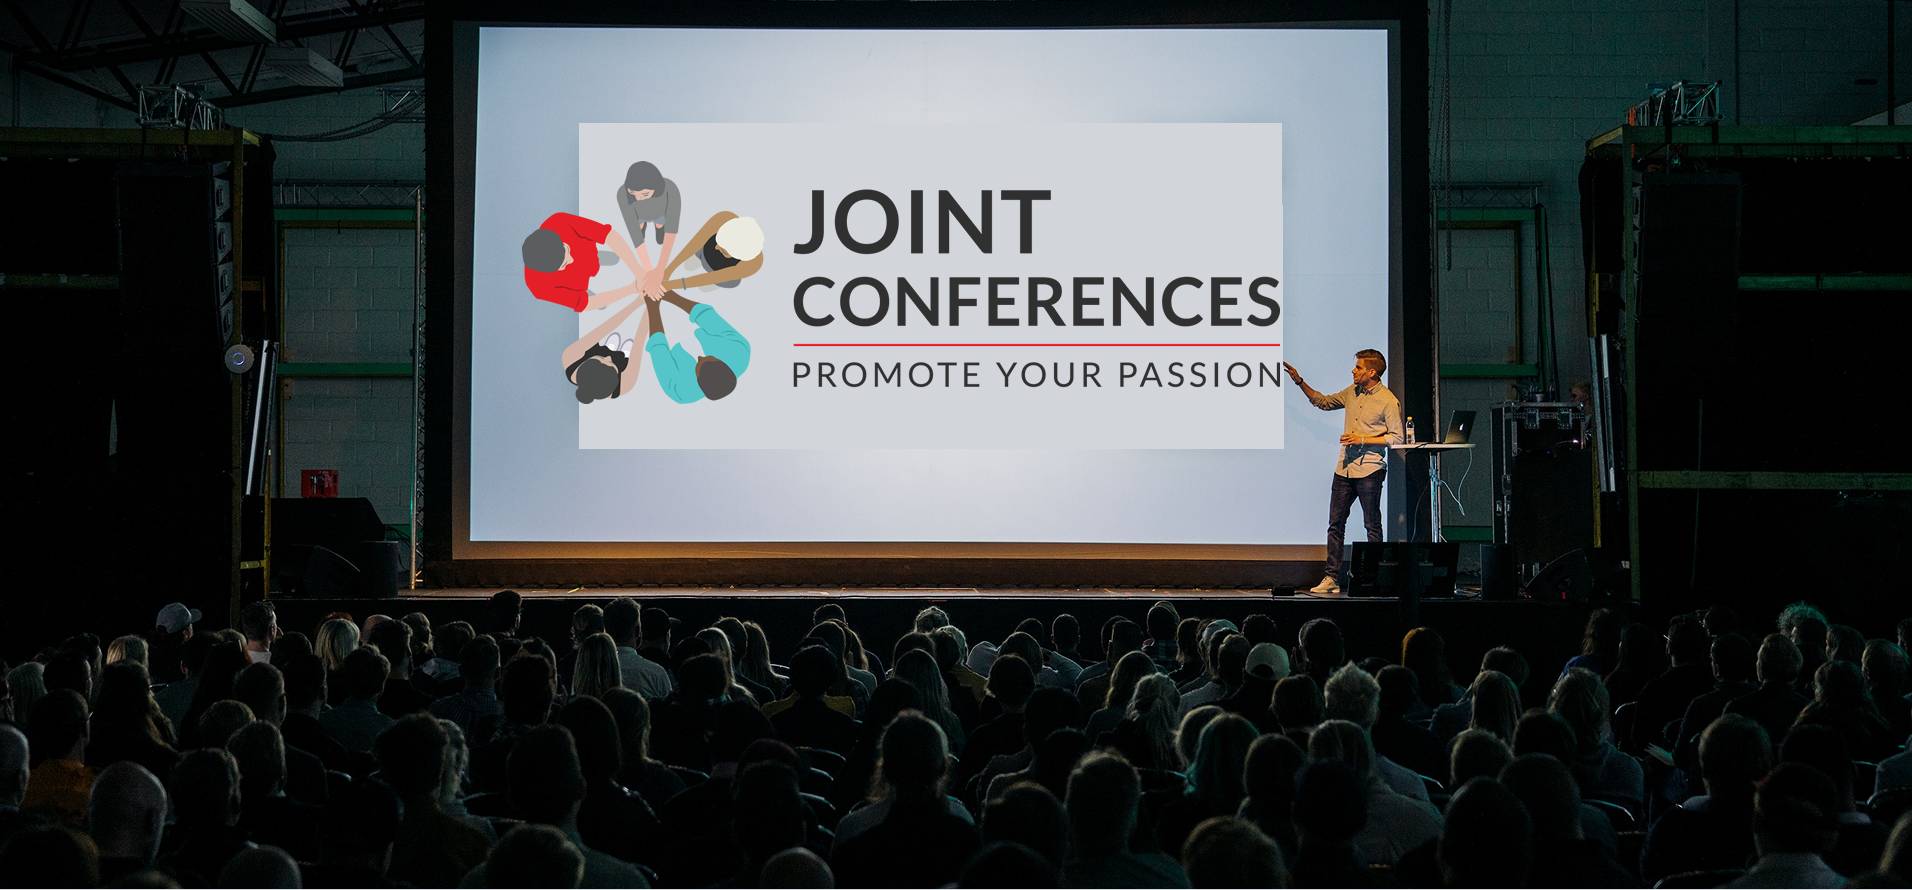 Promote Your Passion with Joint Conferences